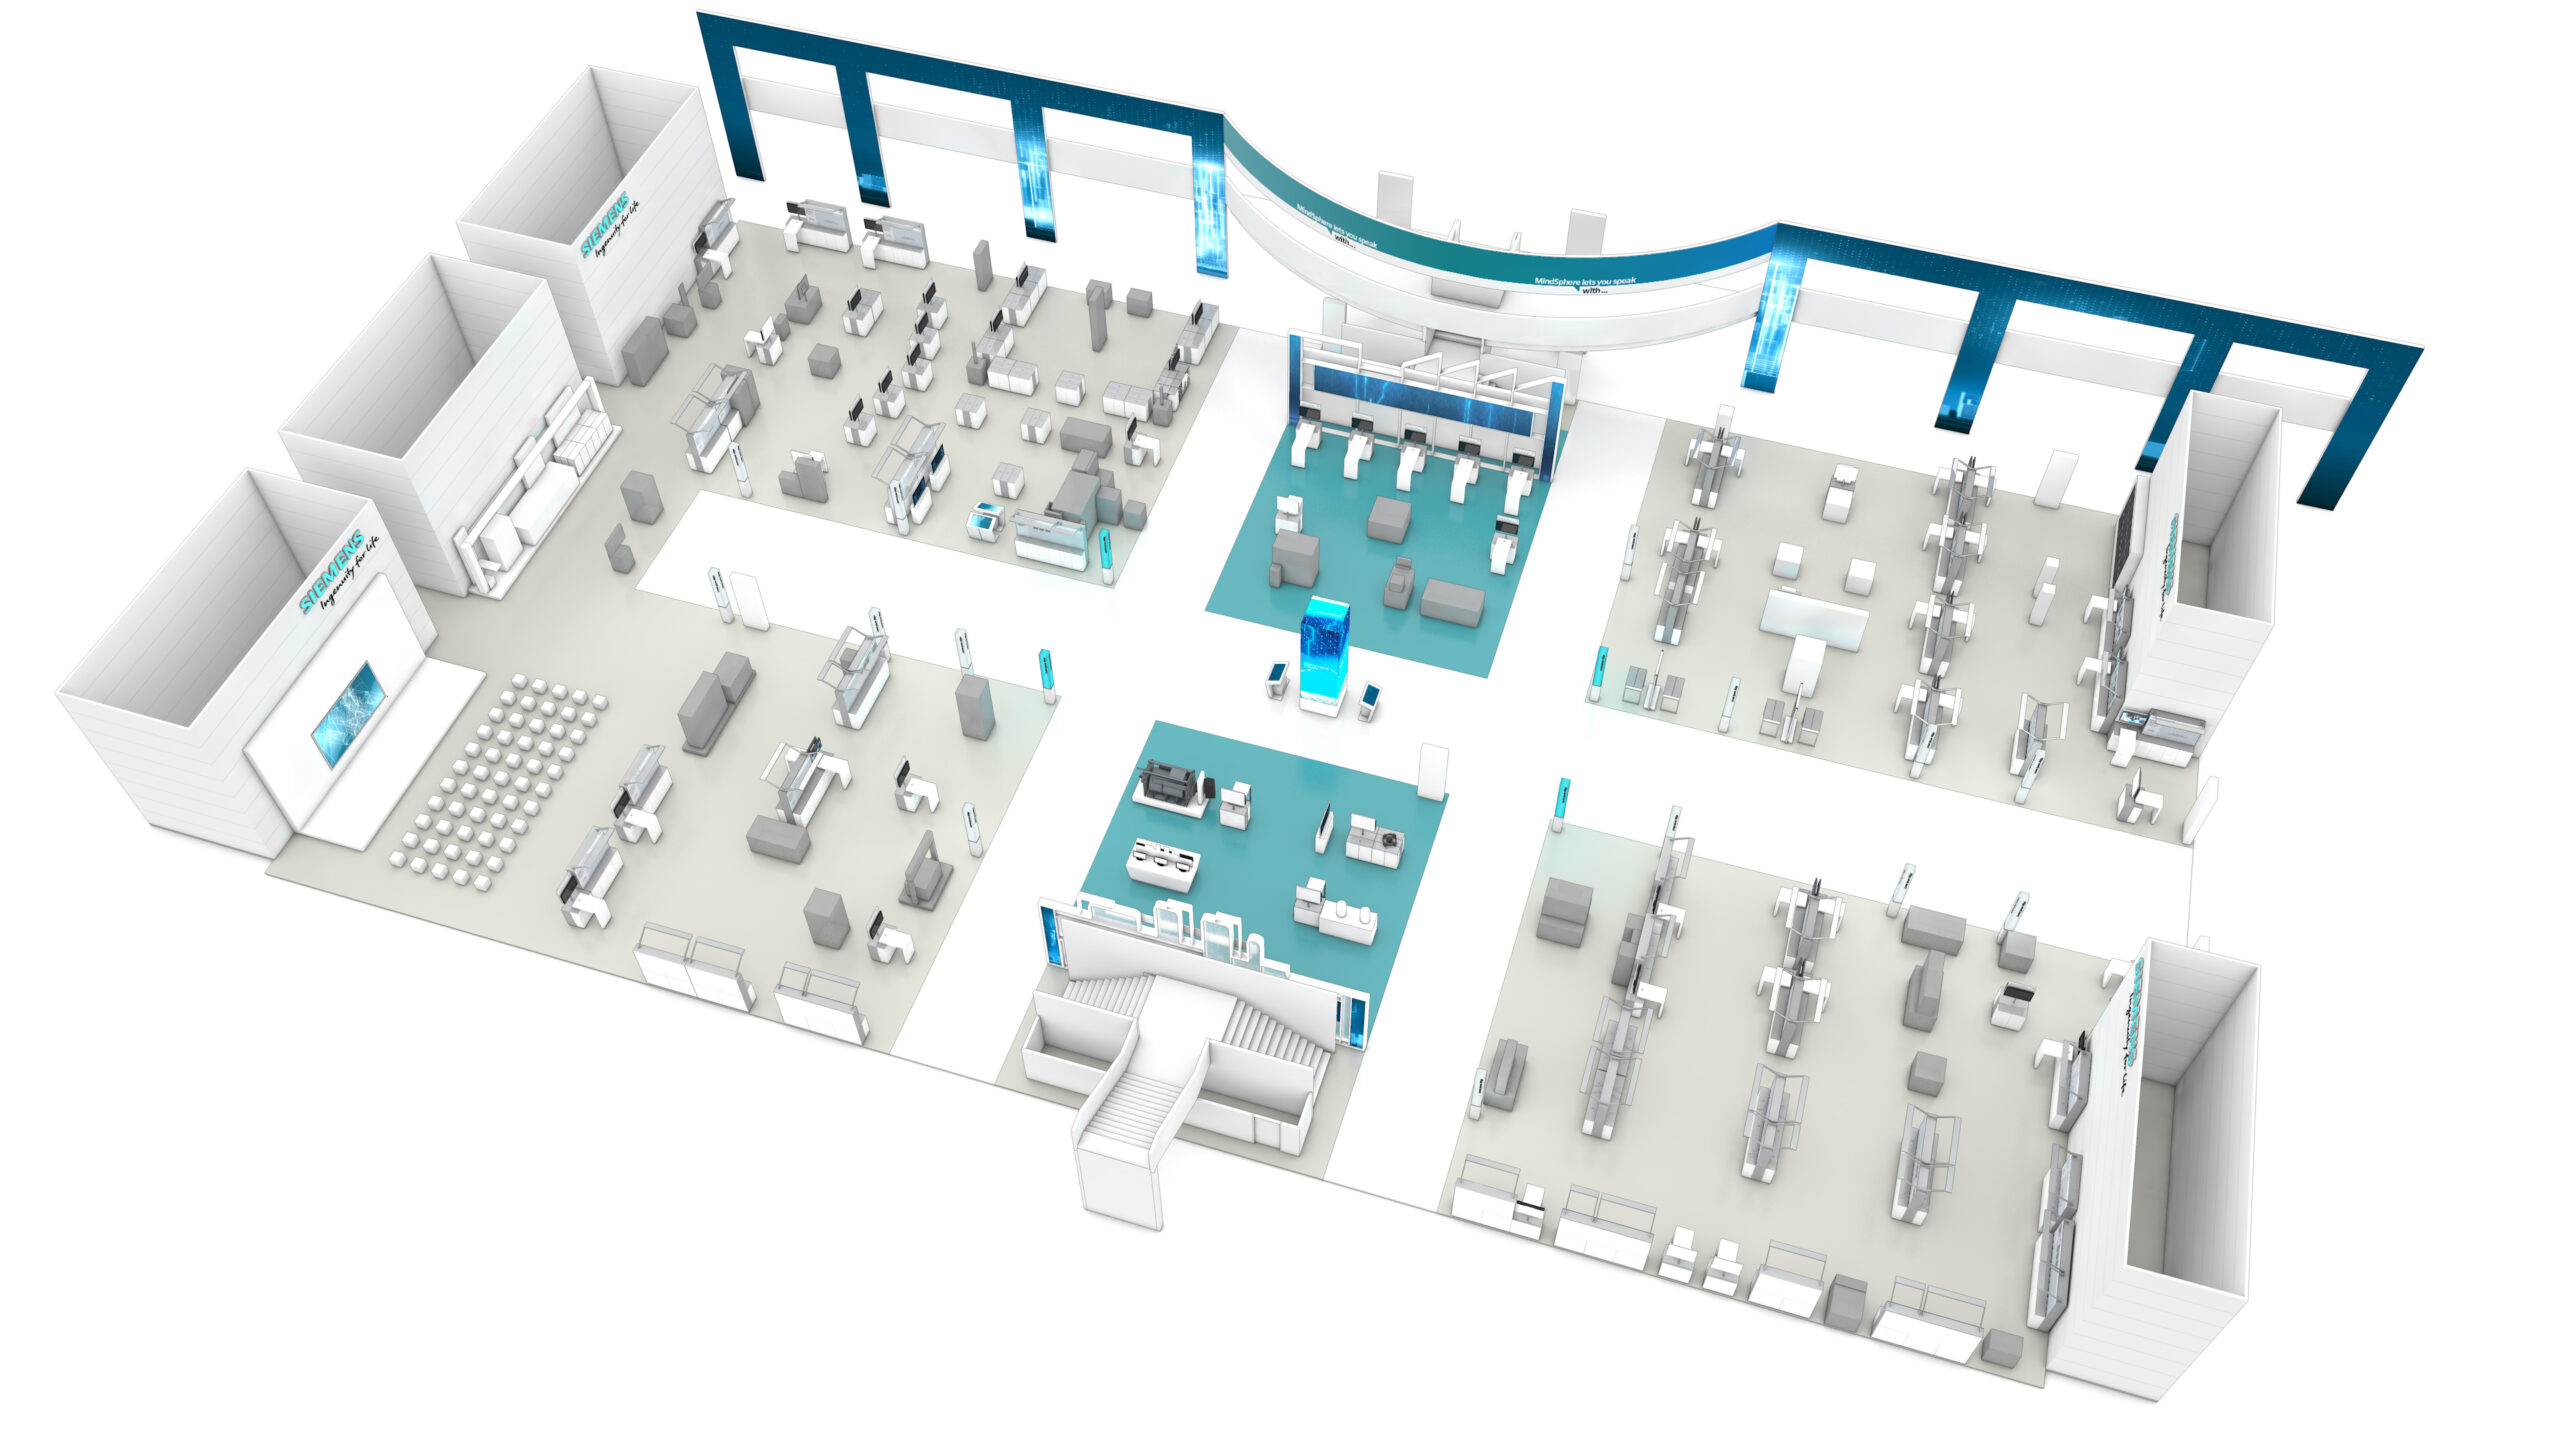 Illustration of a floor plan at a tradeshow